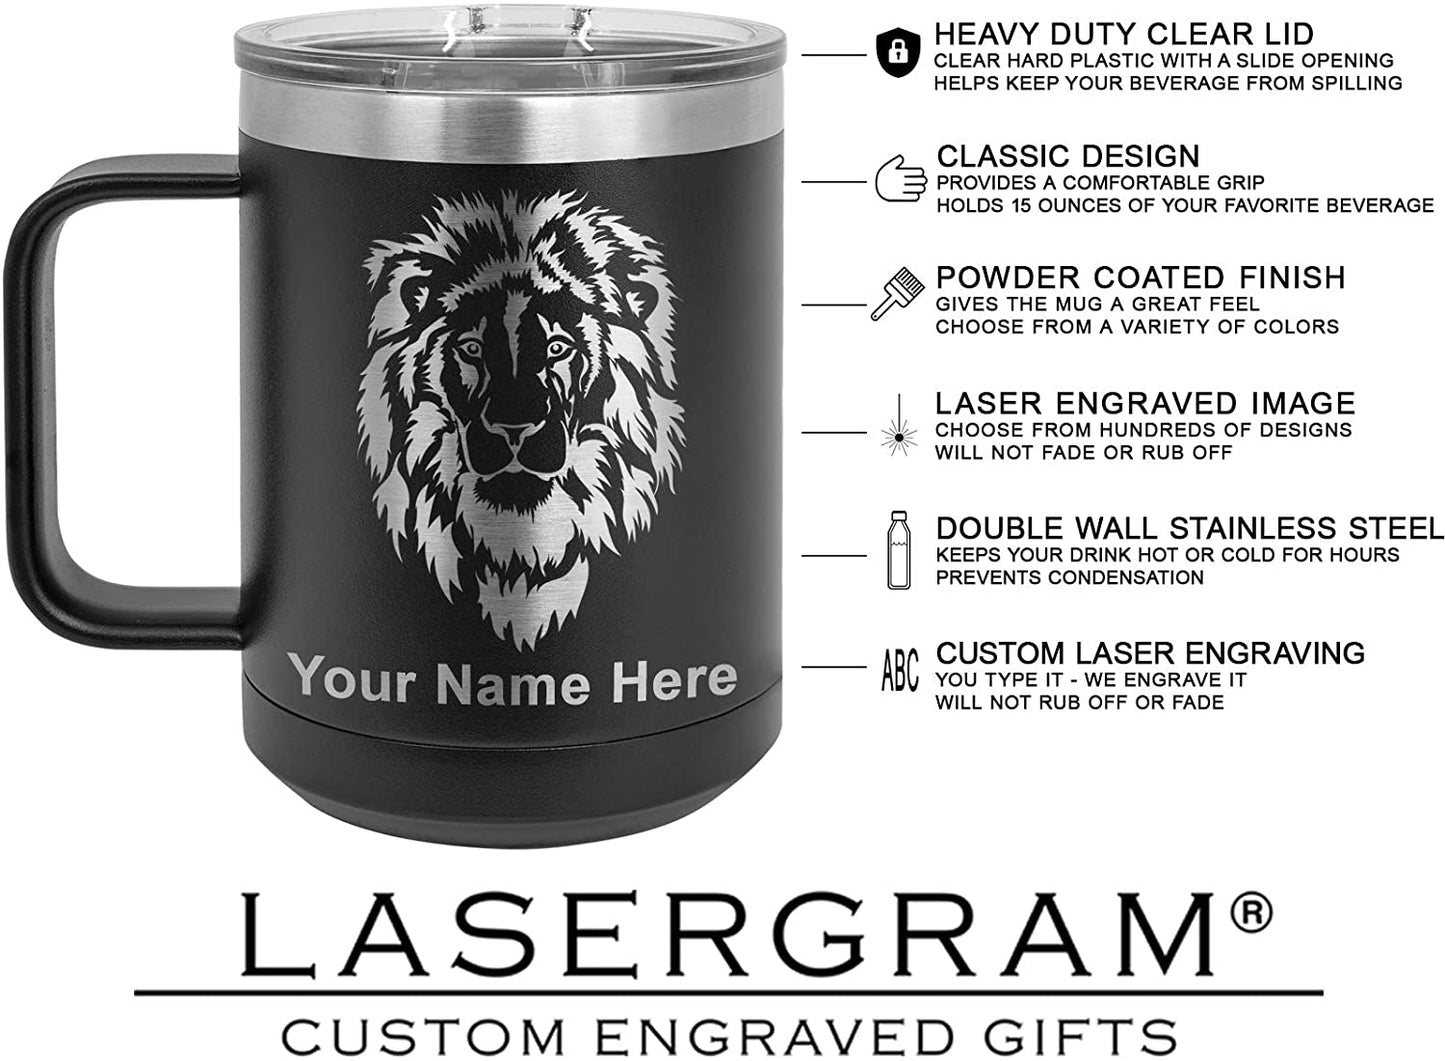 15oz Vacuum Insulated Coffee Mug, Paramedic, Personalized Engraving Included